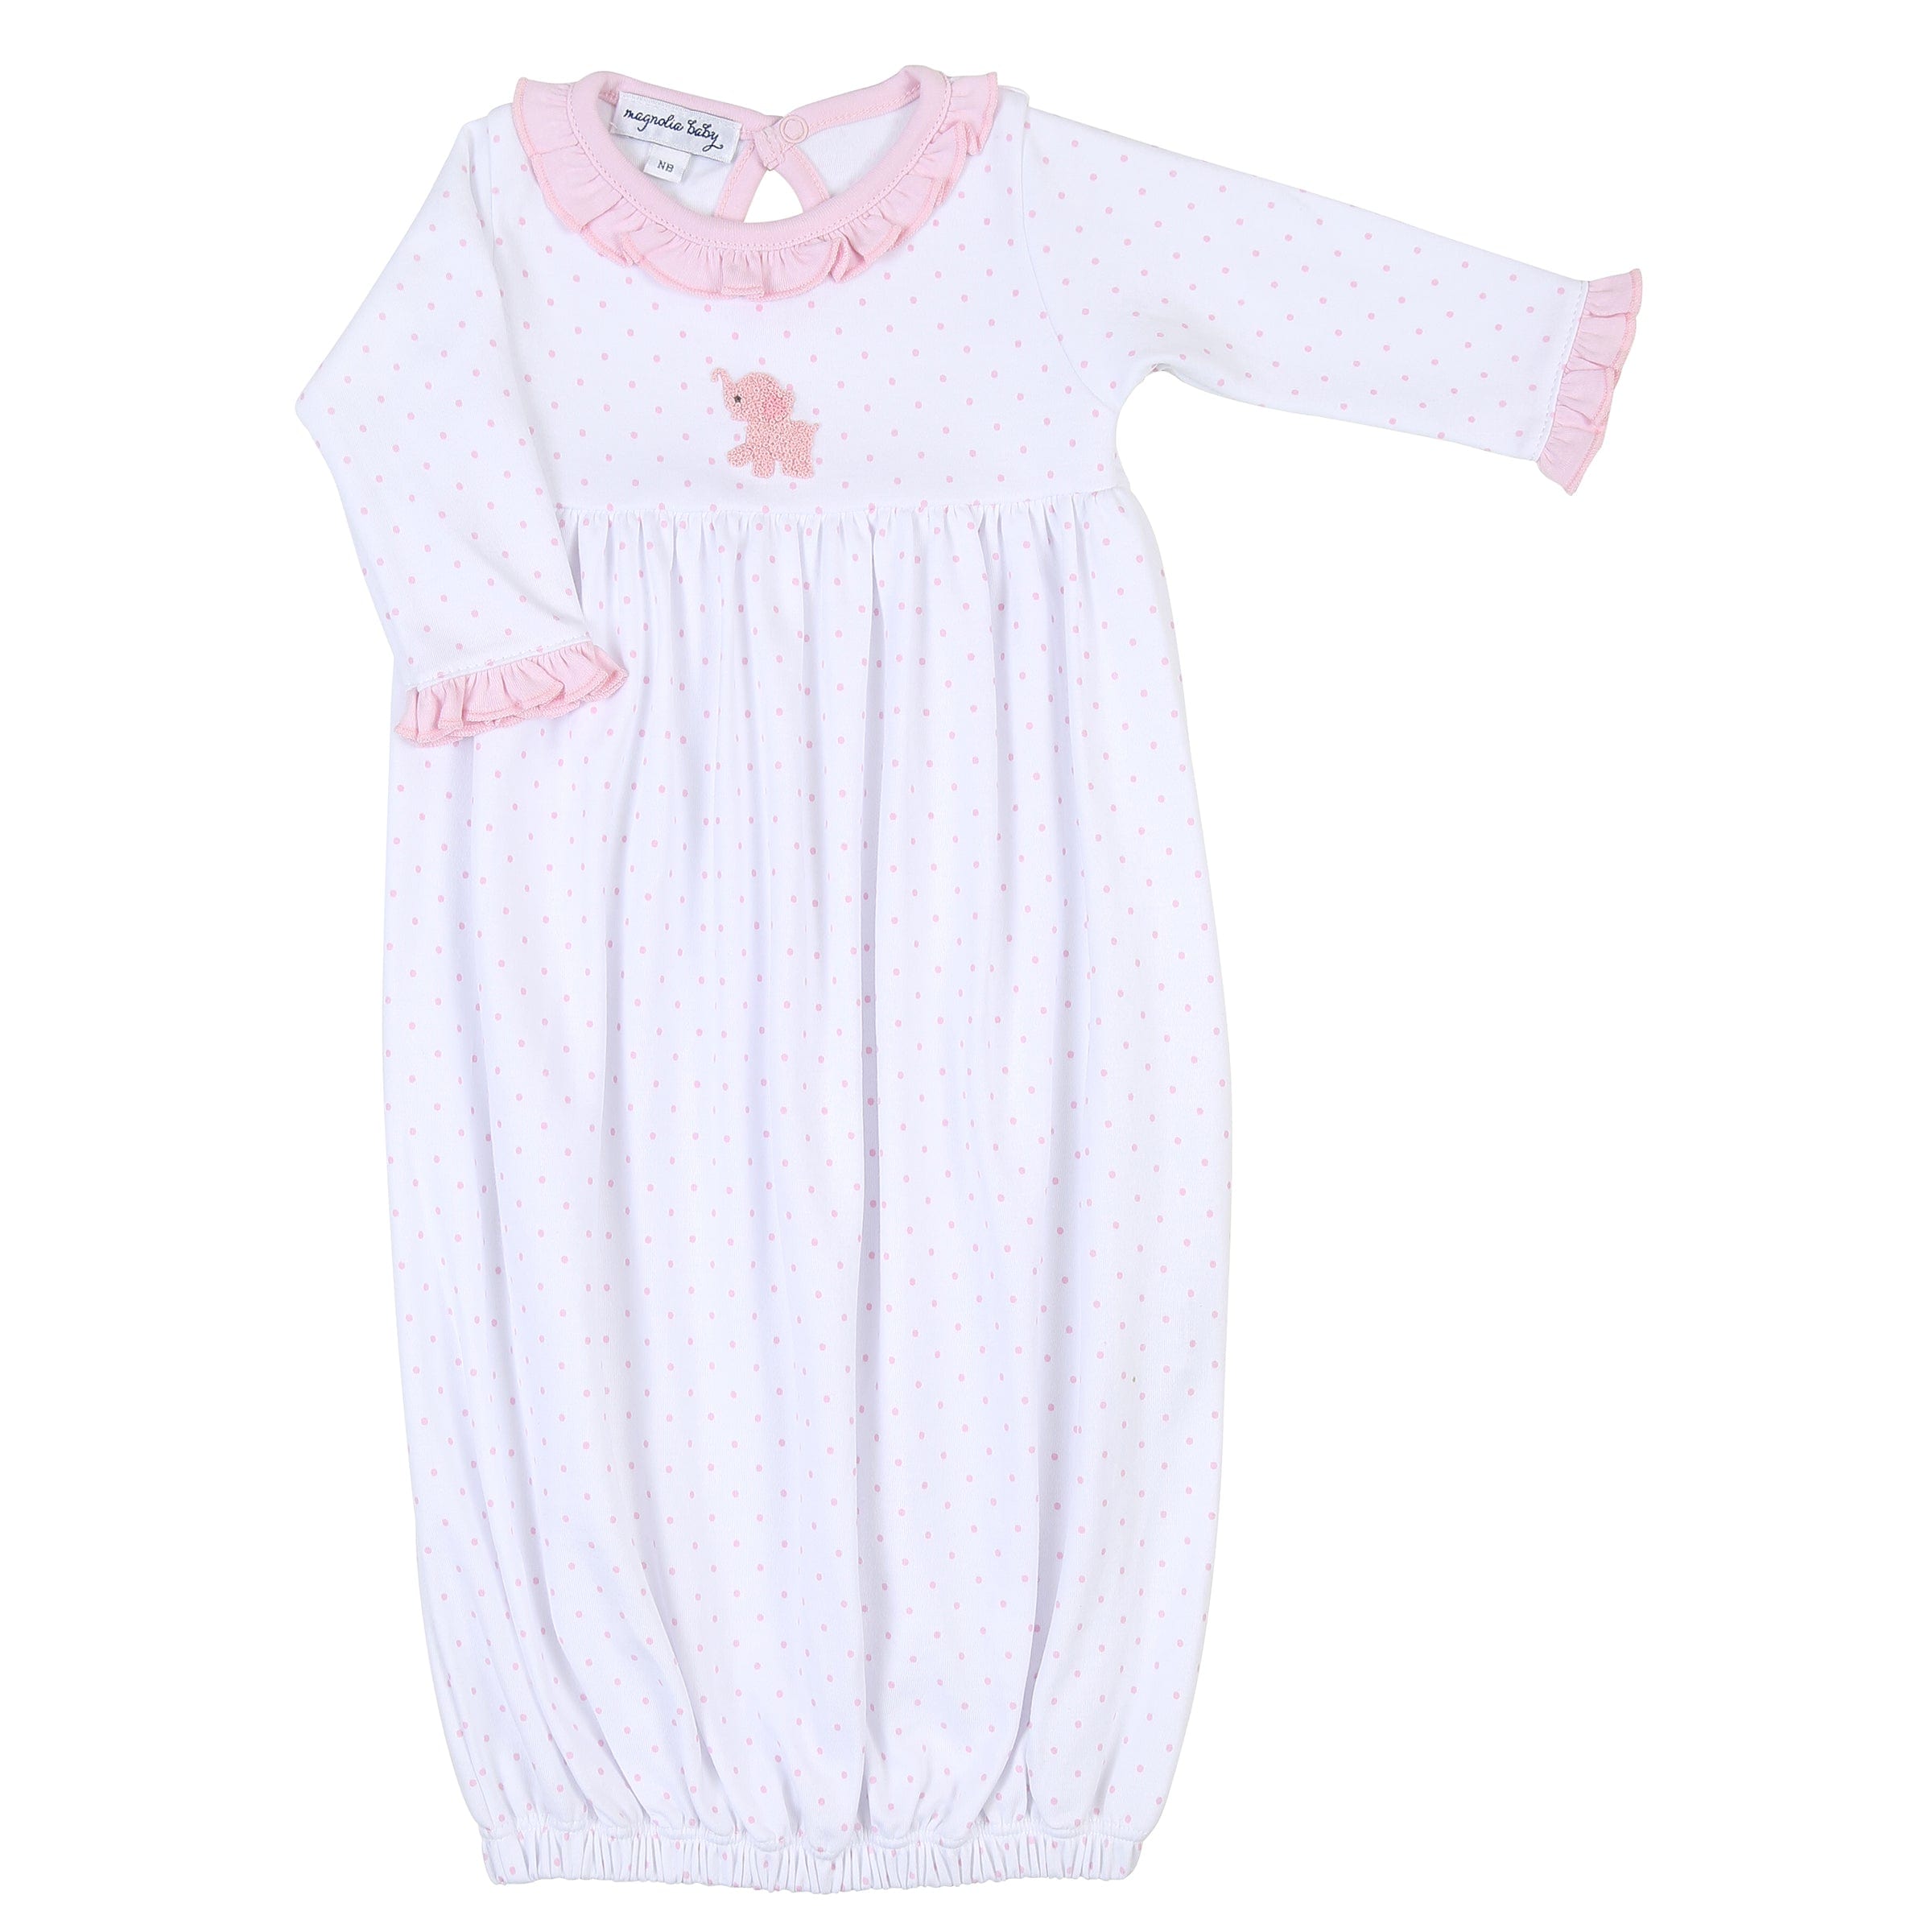 MAGNOLIA BABY - Tiny Elephant Gathered Gown - Pink